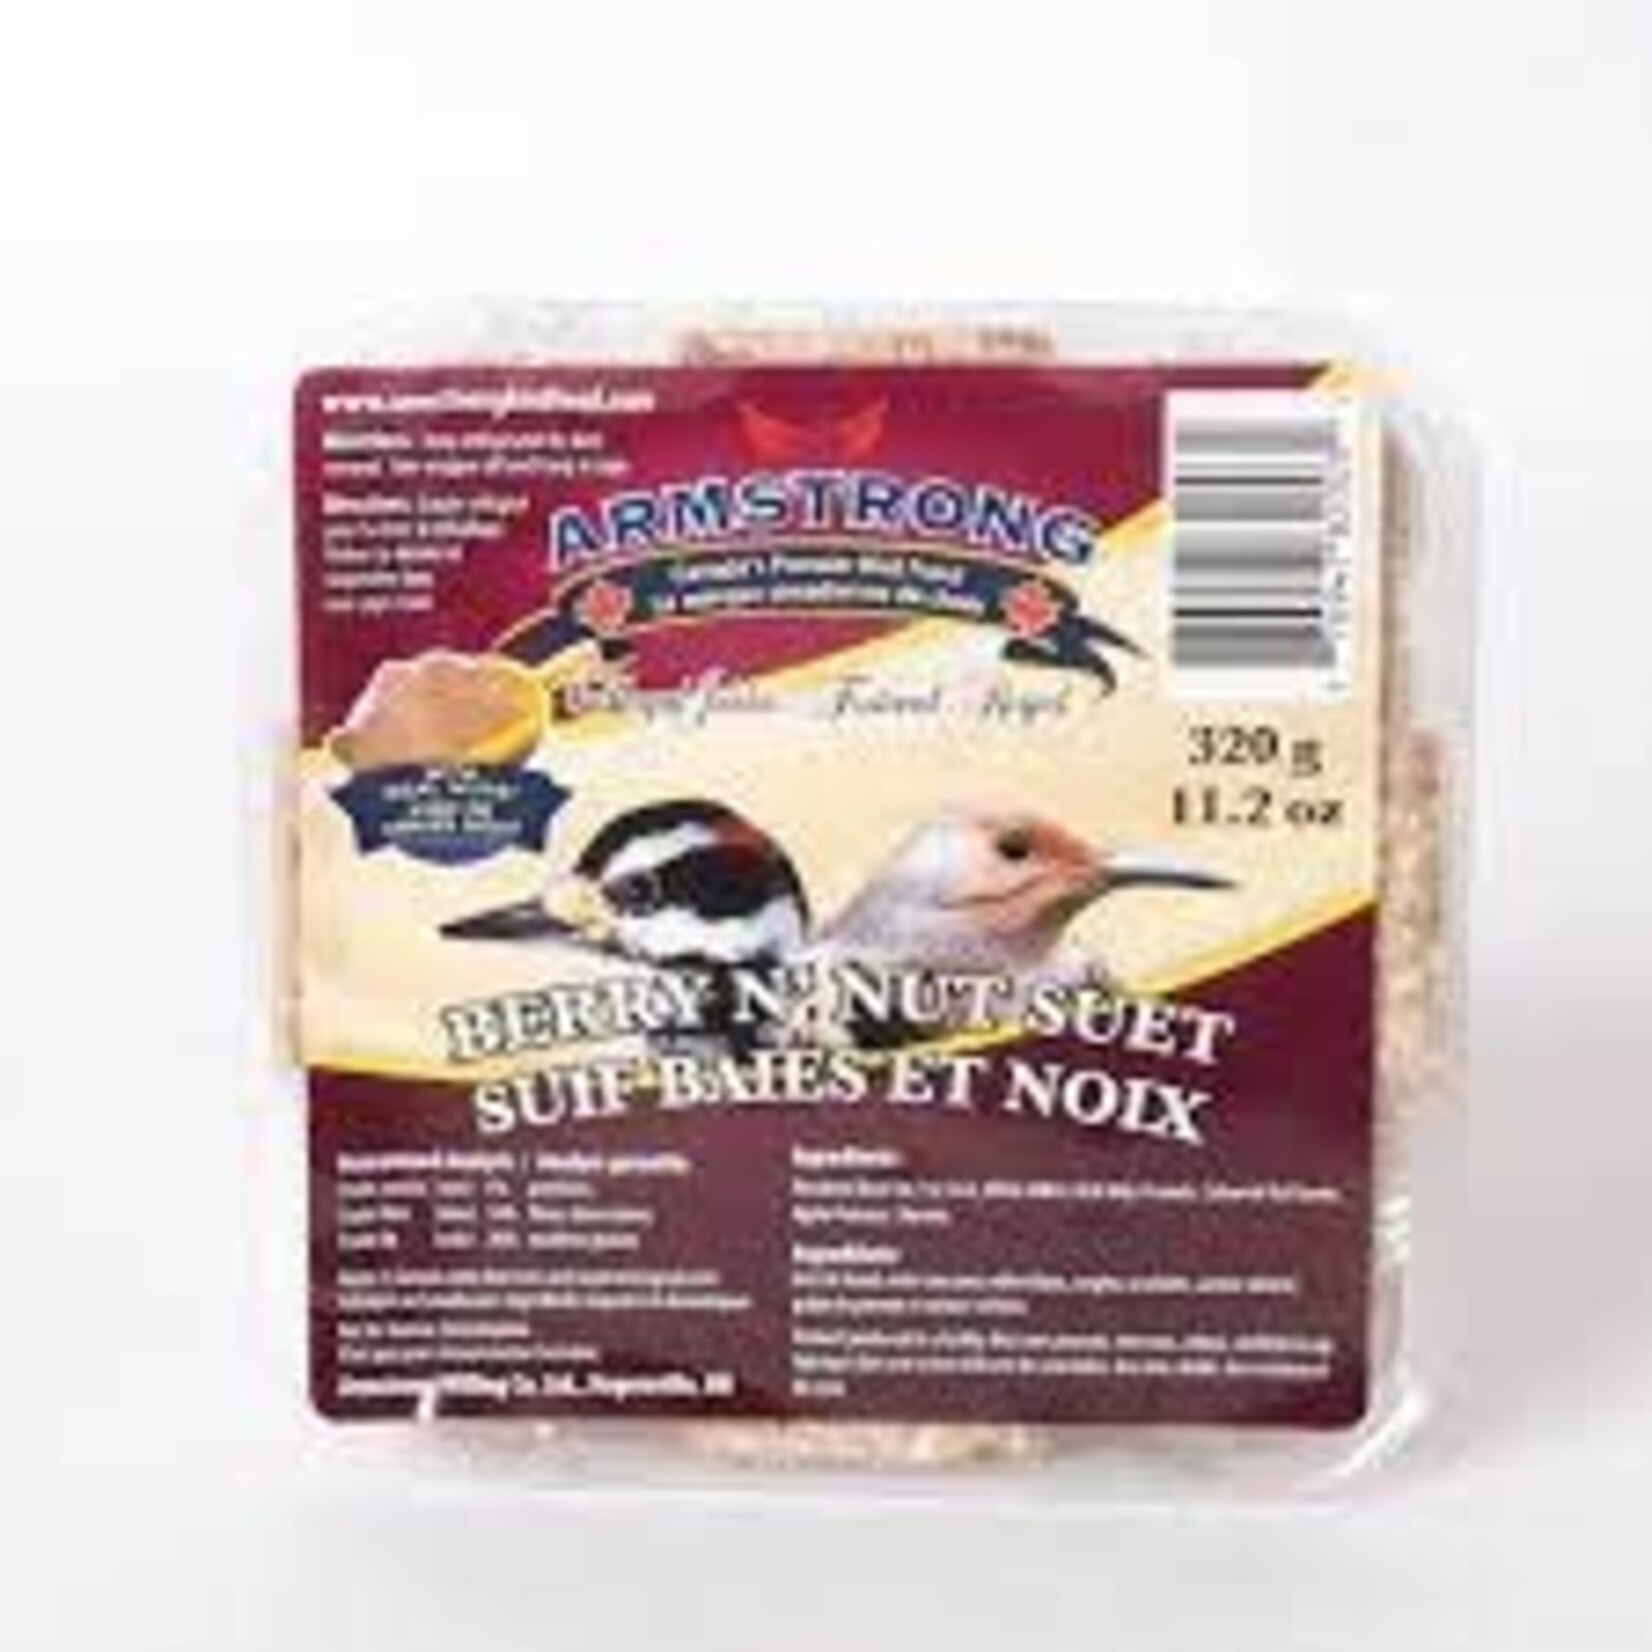 Armstrong Royal Jubilee Berry N' Nut Suet 320g